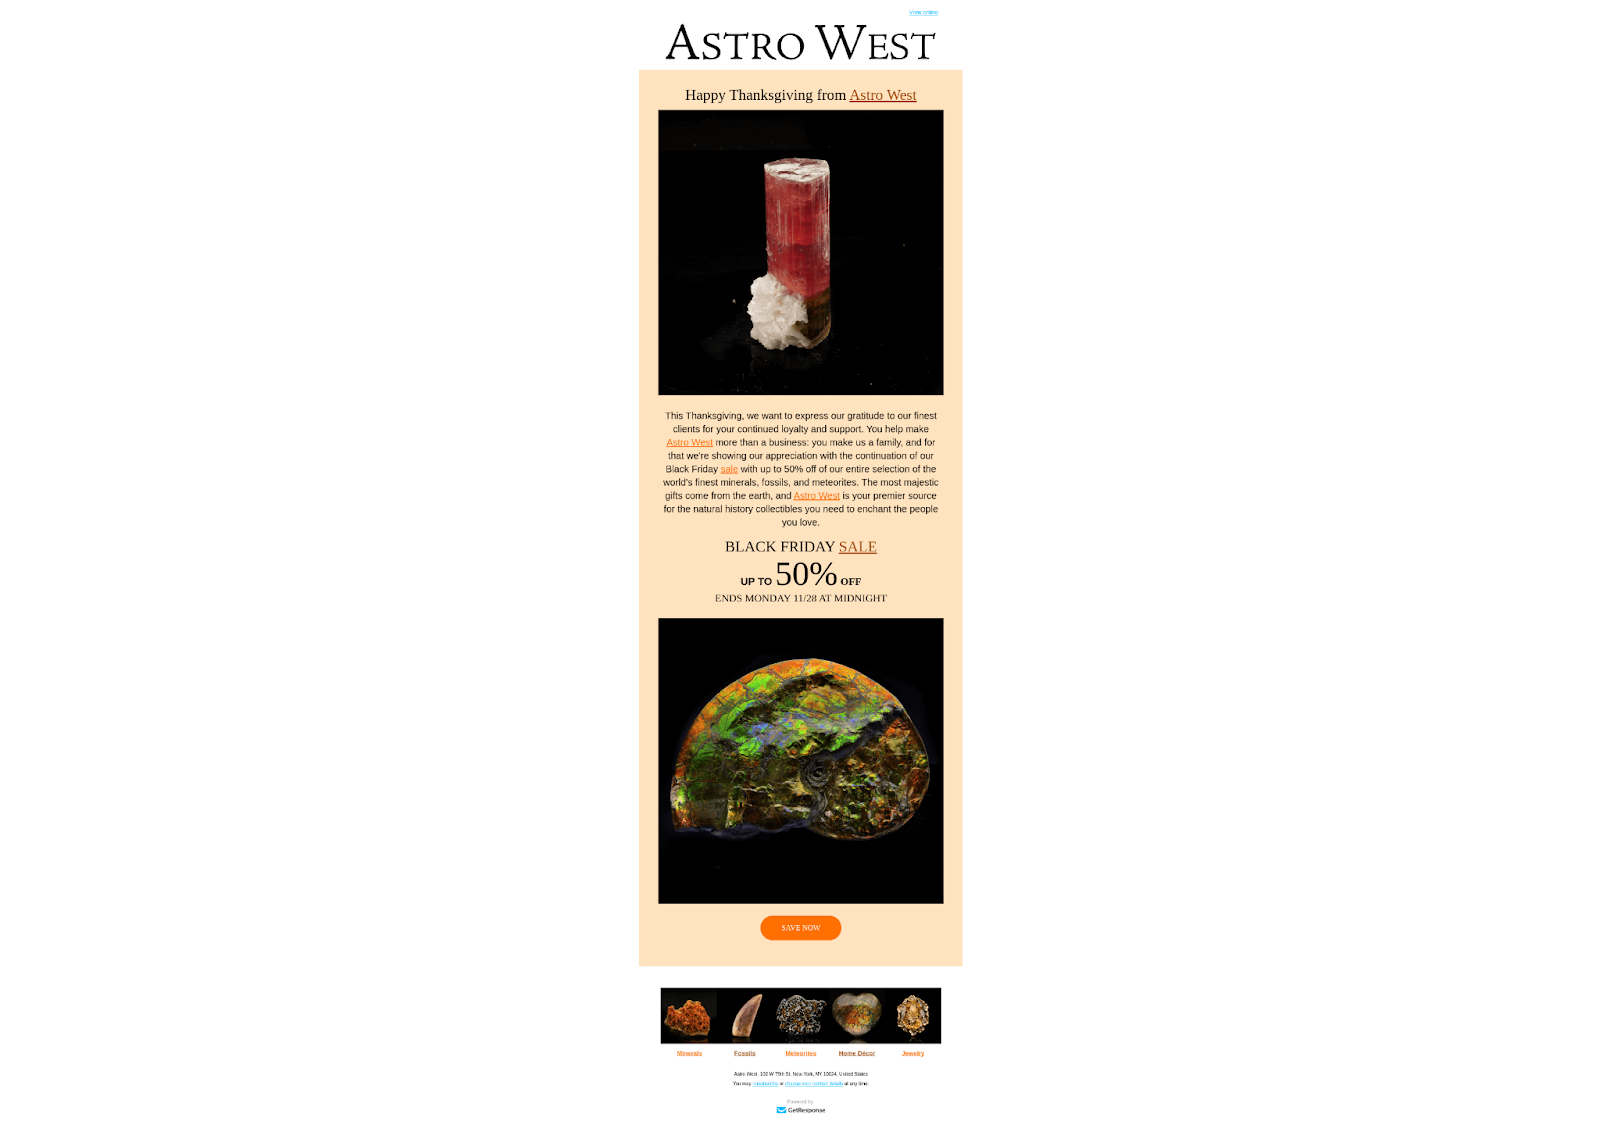 Email campaign - Astro West